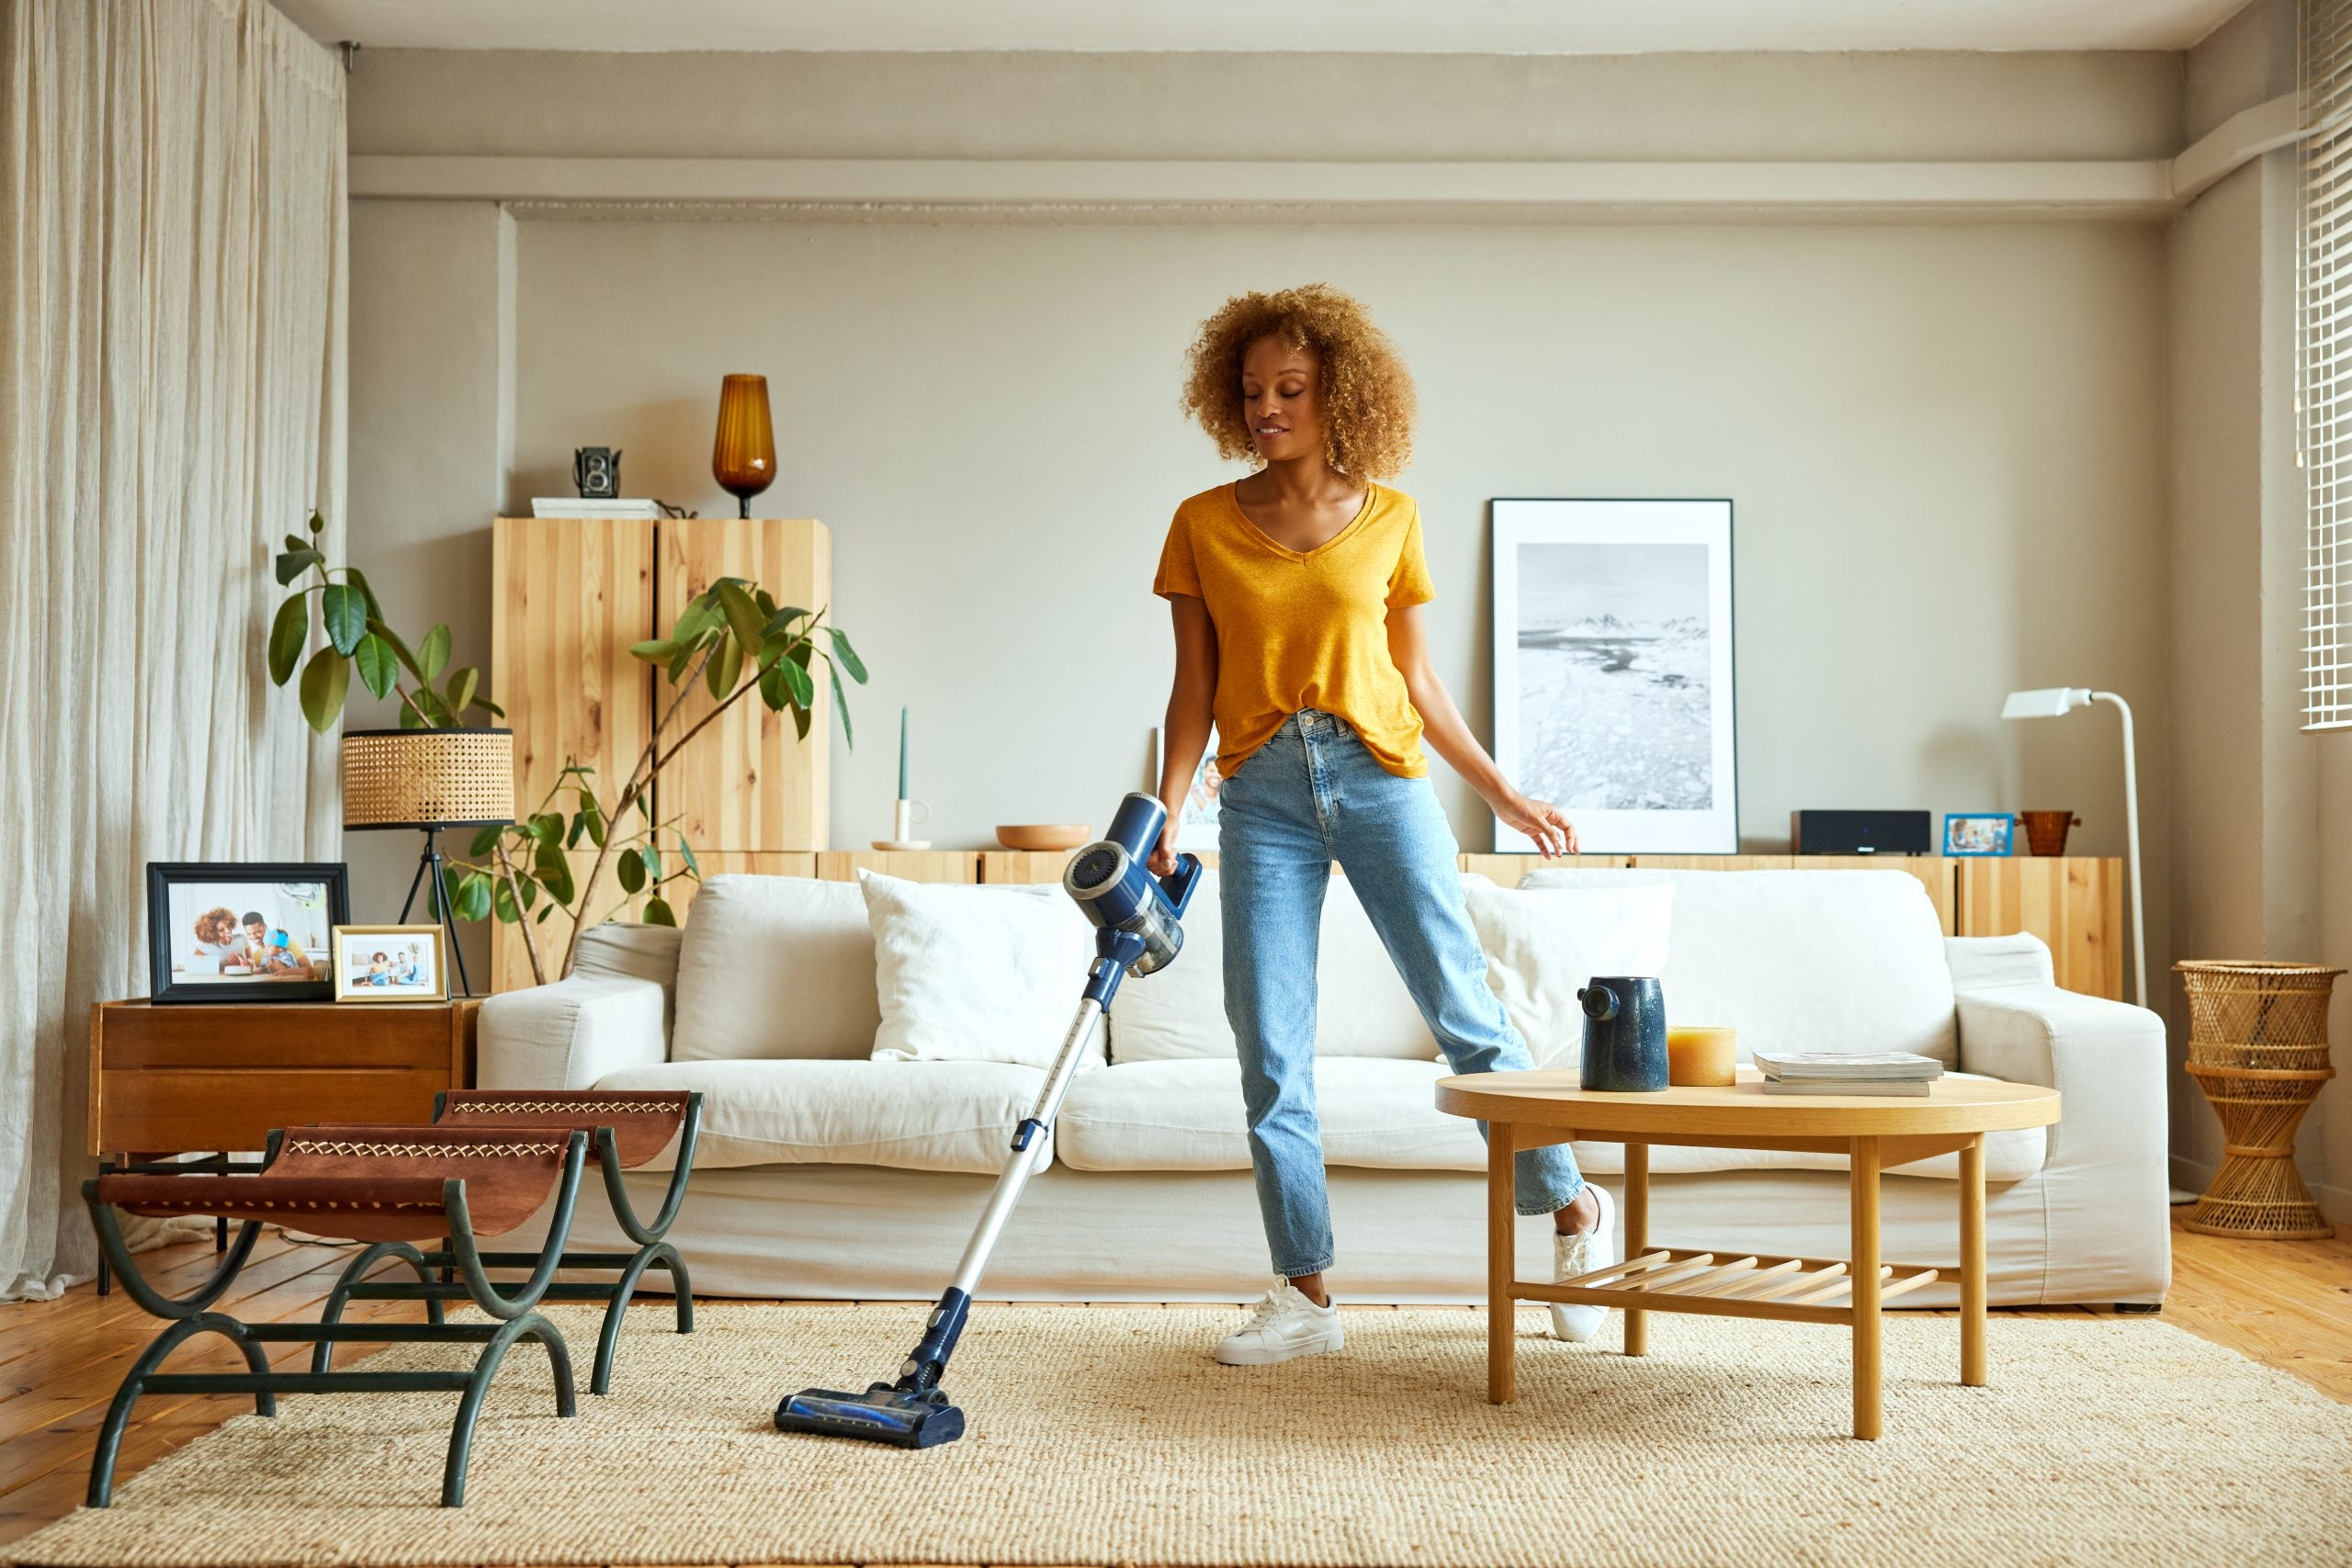 4 Must-Have Cleaning Gadgets That Will Clean For You - The Cleaning Lady